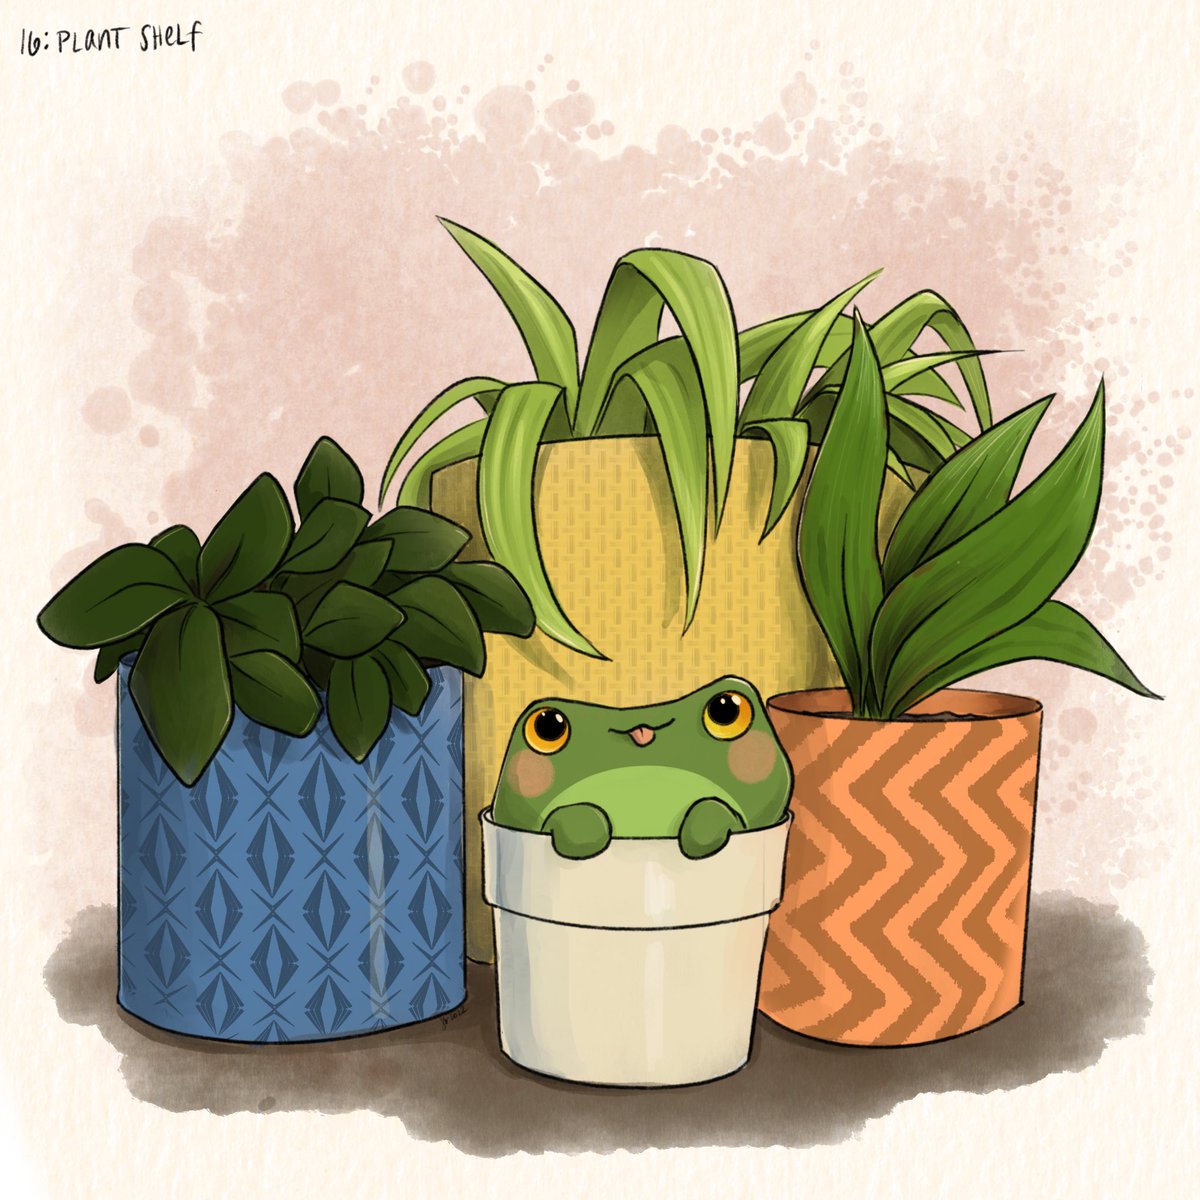 Today’s #froggyfall catch-up is probably my favorite so far! Does anyone have tips for cultivating this interesting Frogtato plant?
#froggyfall #froggyfall2022 #frog #plantshelf